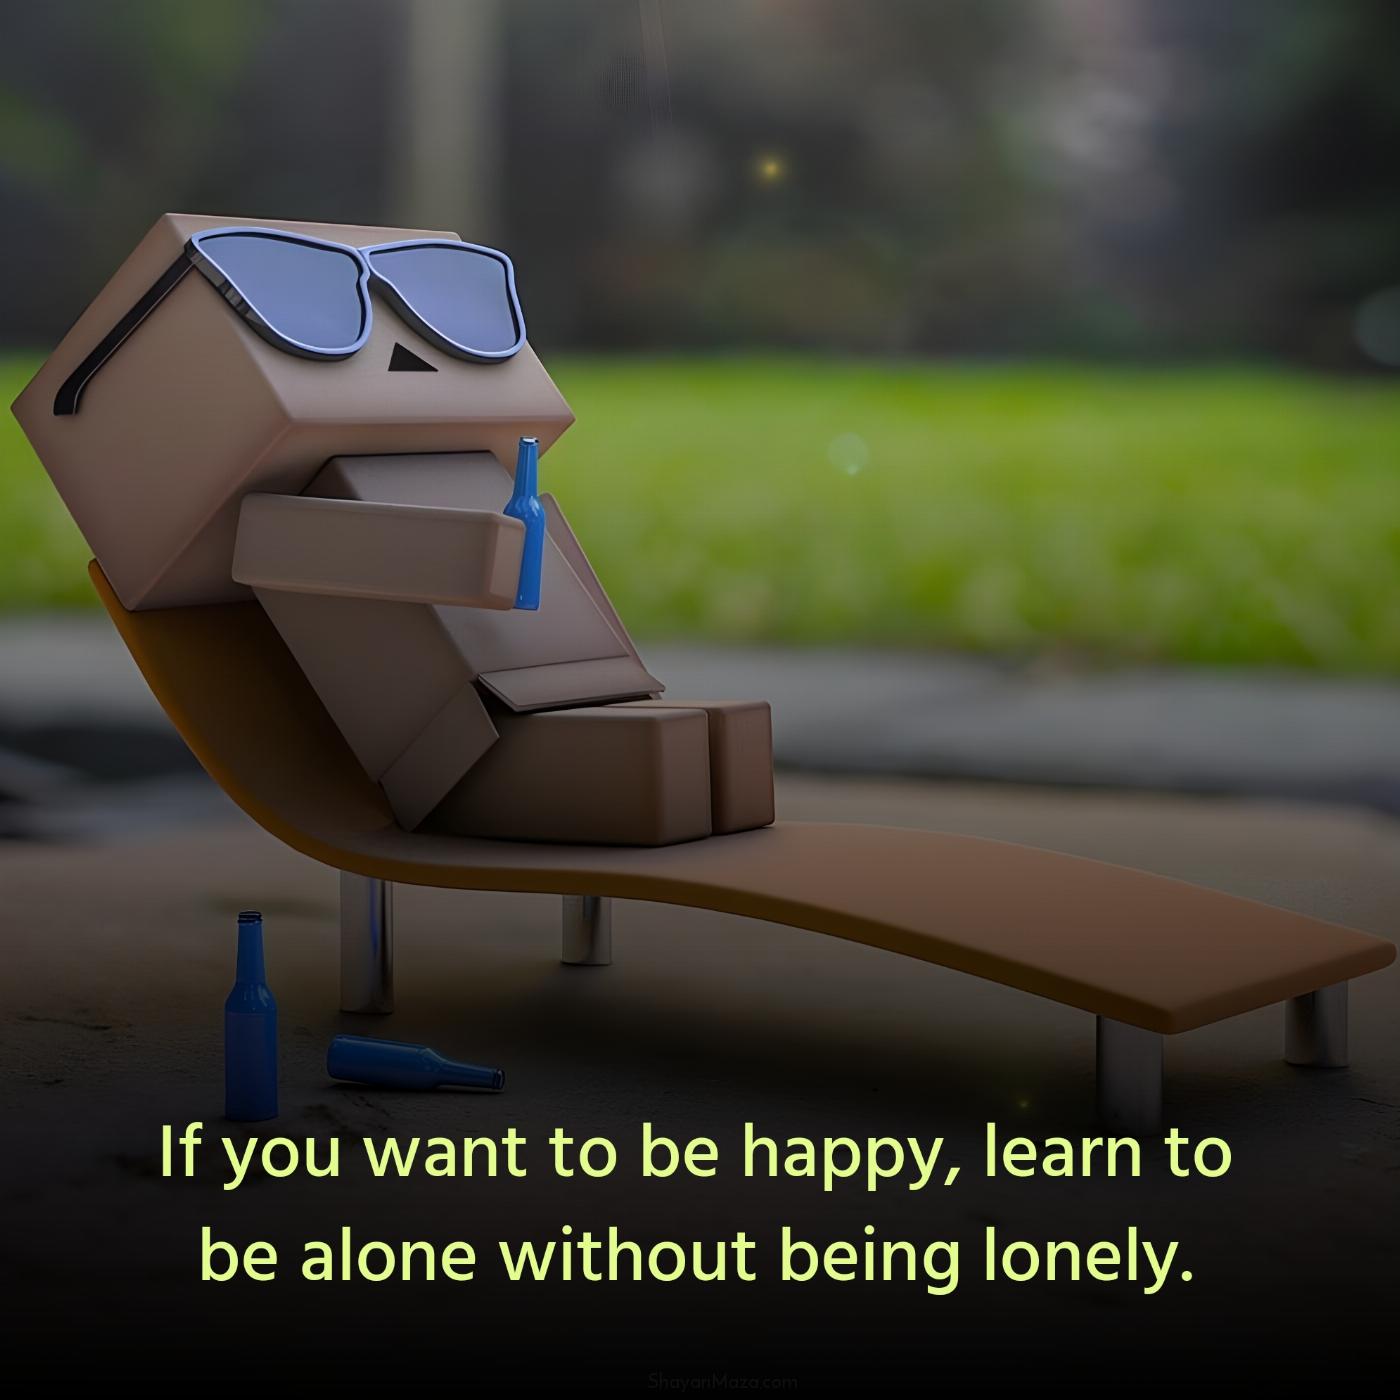 If you want to be happy learn to be alone without being lonely